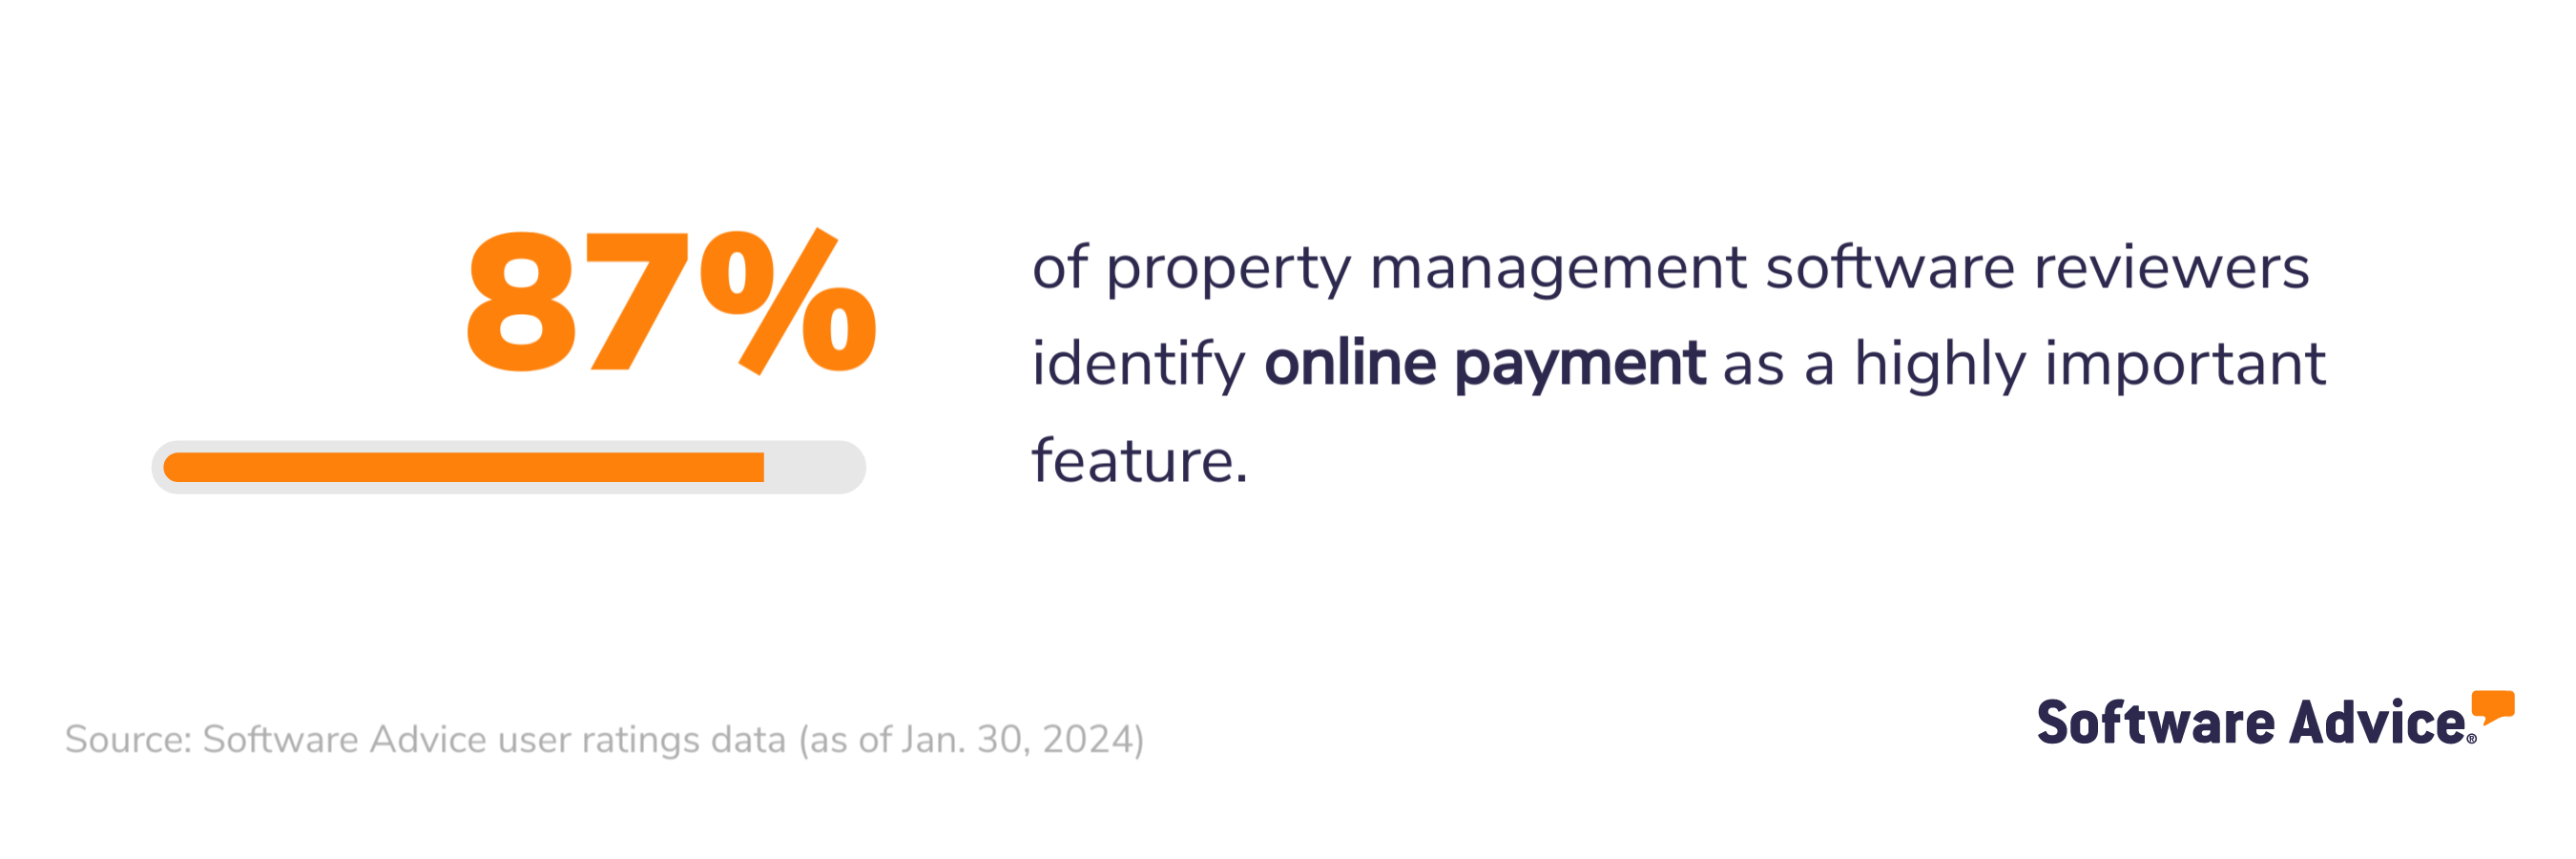 87% of property management software reviewers identify online payment as a highly important feature.